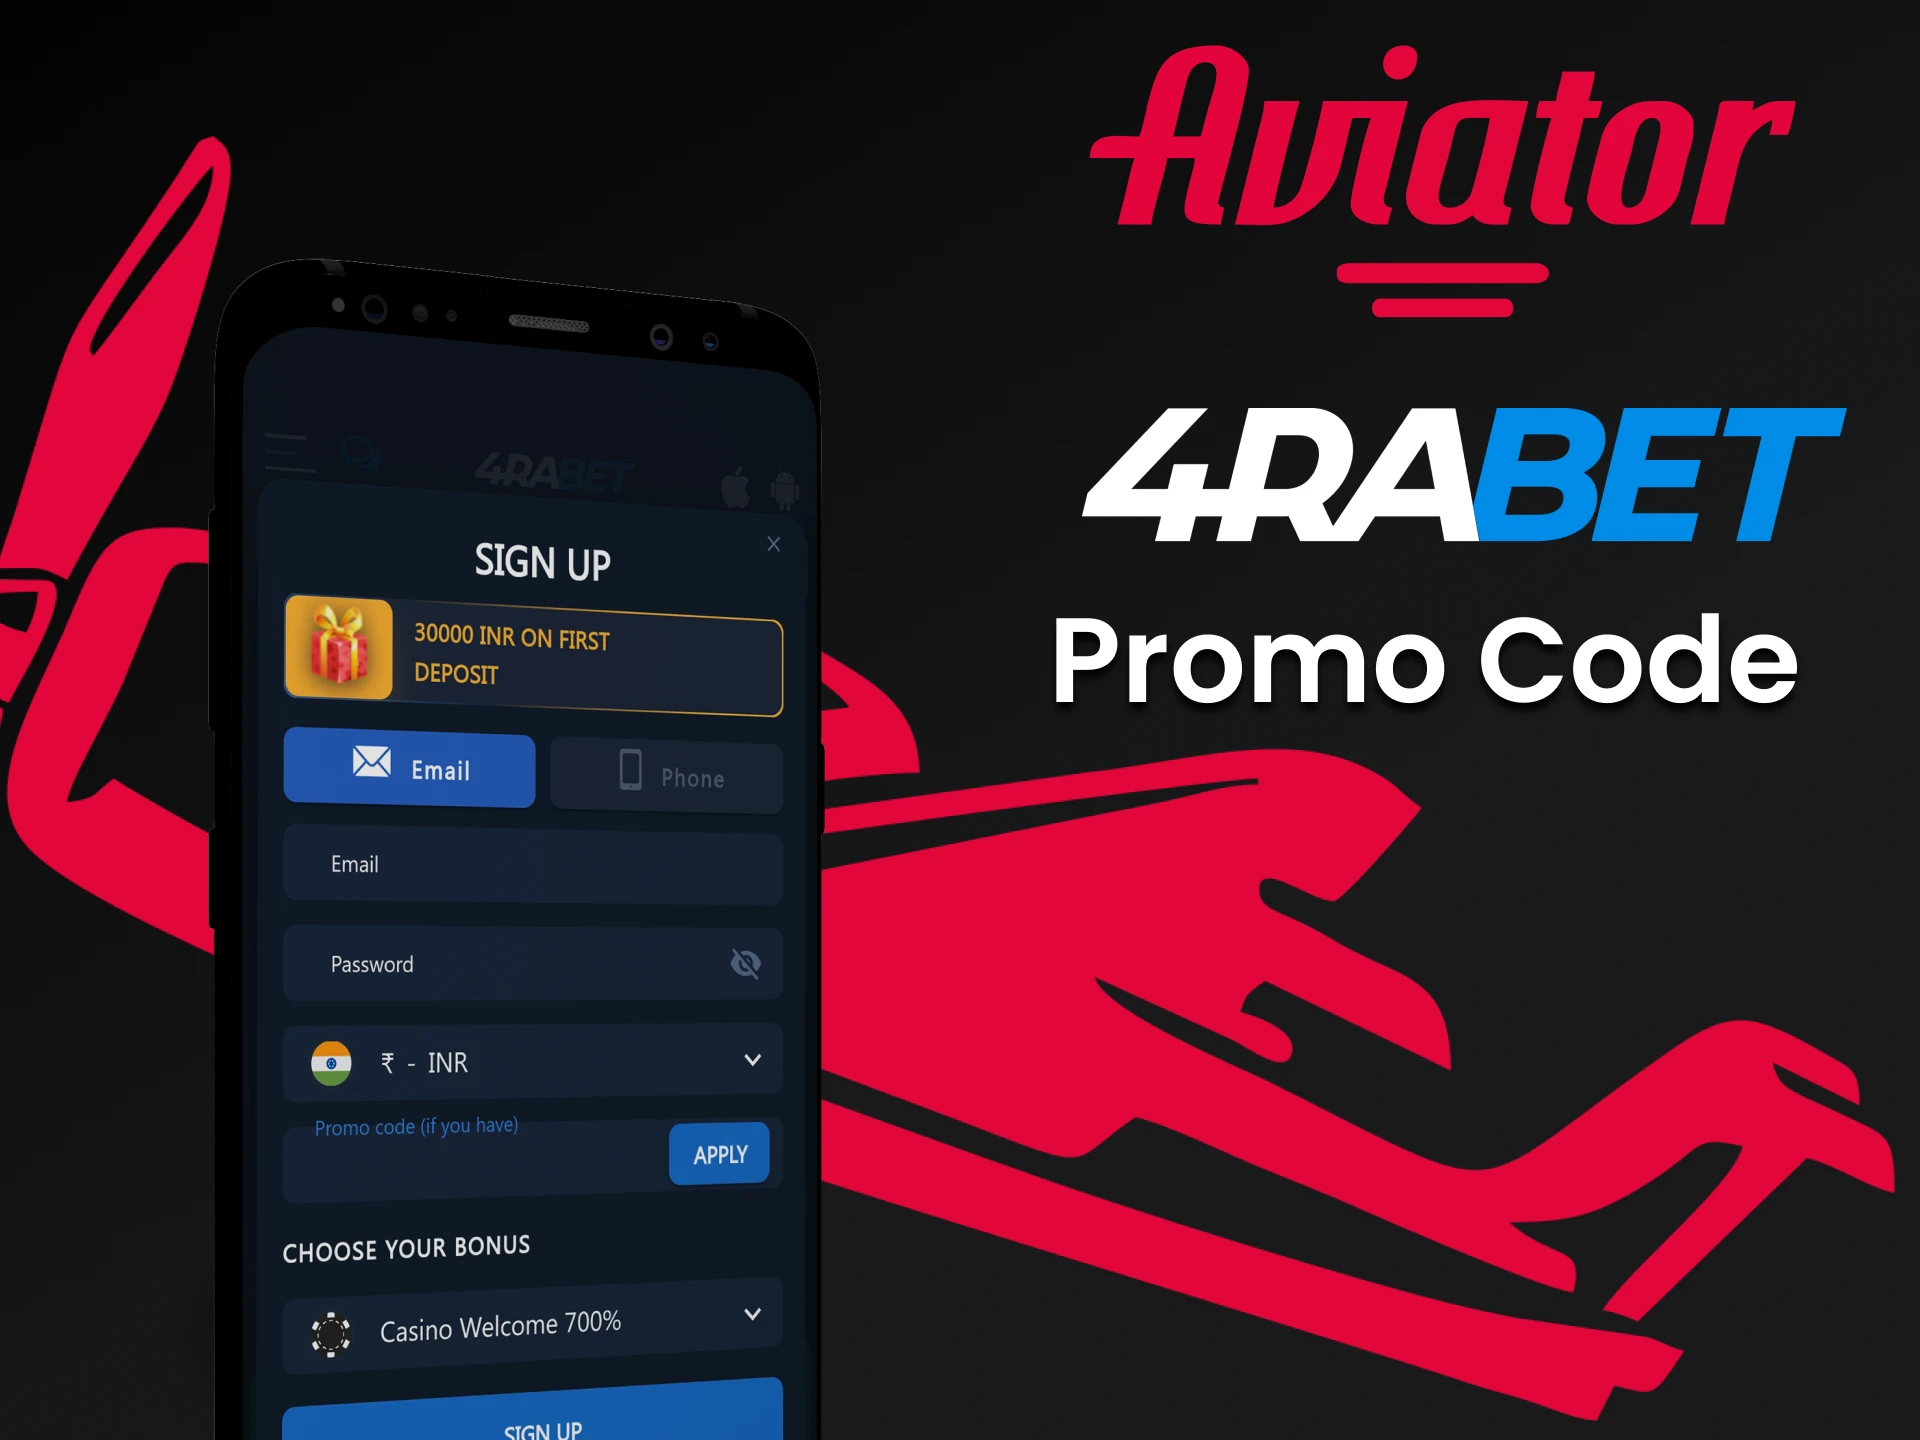 Use a special promo code from 4rabet to play Aviator.